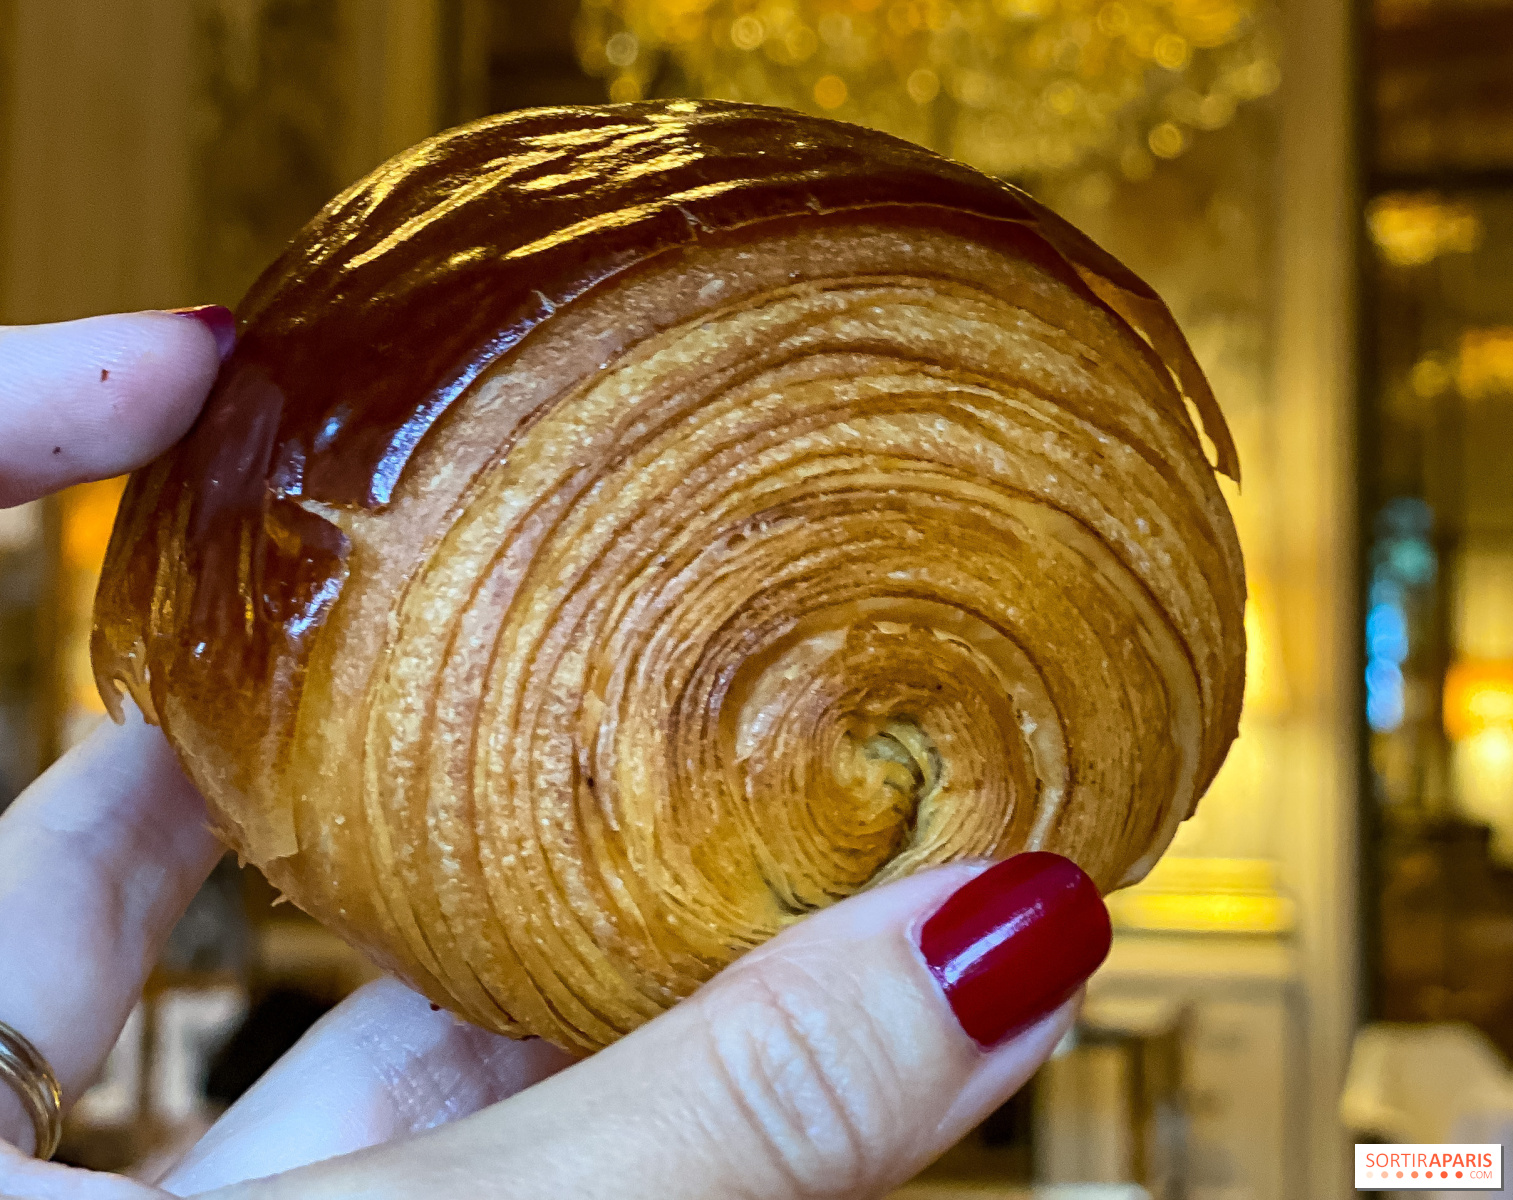 Le Meurice unveils its new breakfast featuring Cédric Grolet's  viennoiseries 